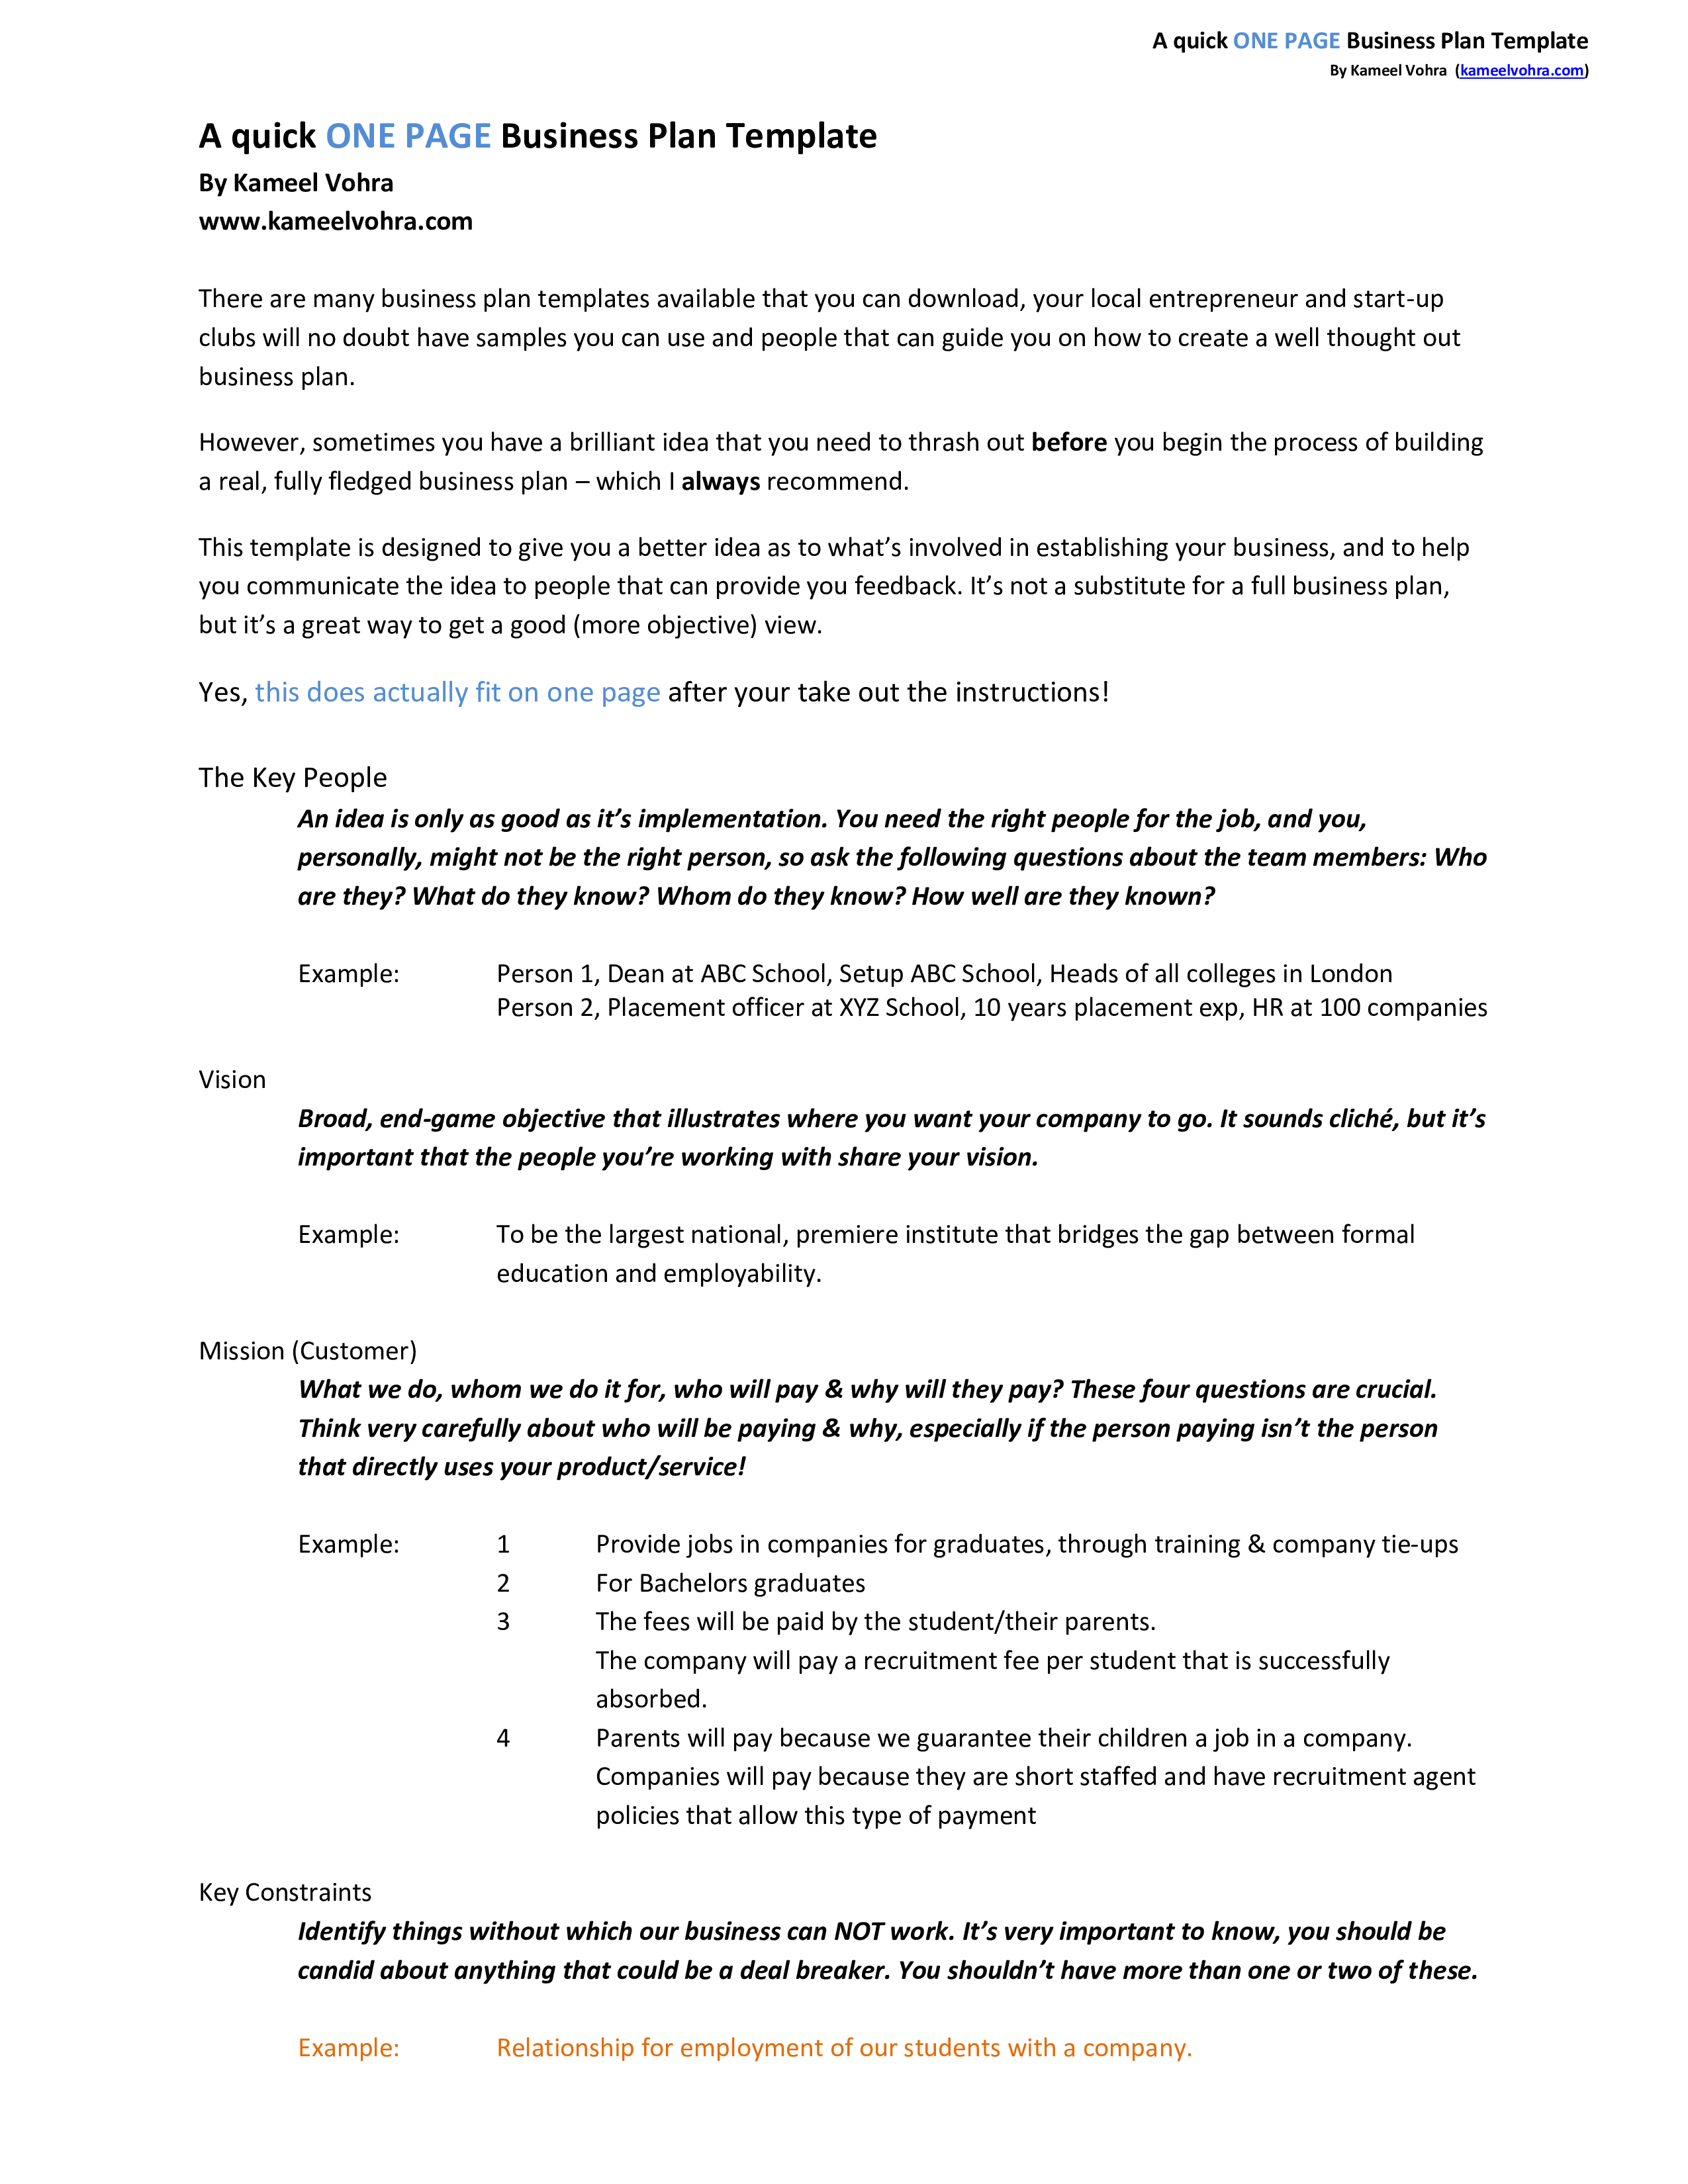 A Quick One Page Business Plan Template - Eloquens Throughout Business Plan For Sales Manager Template